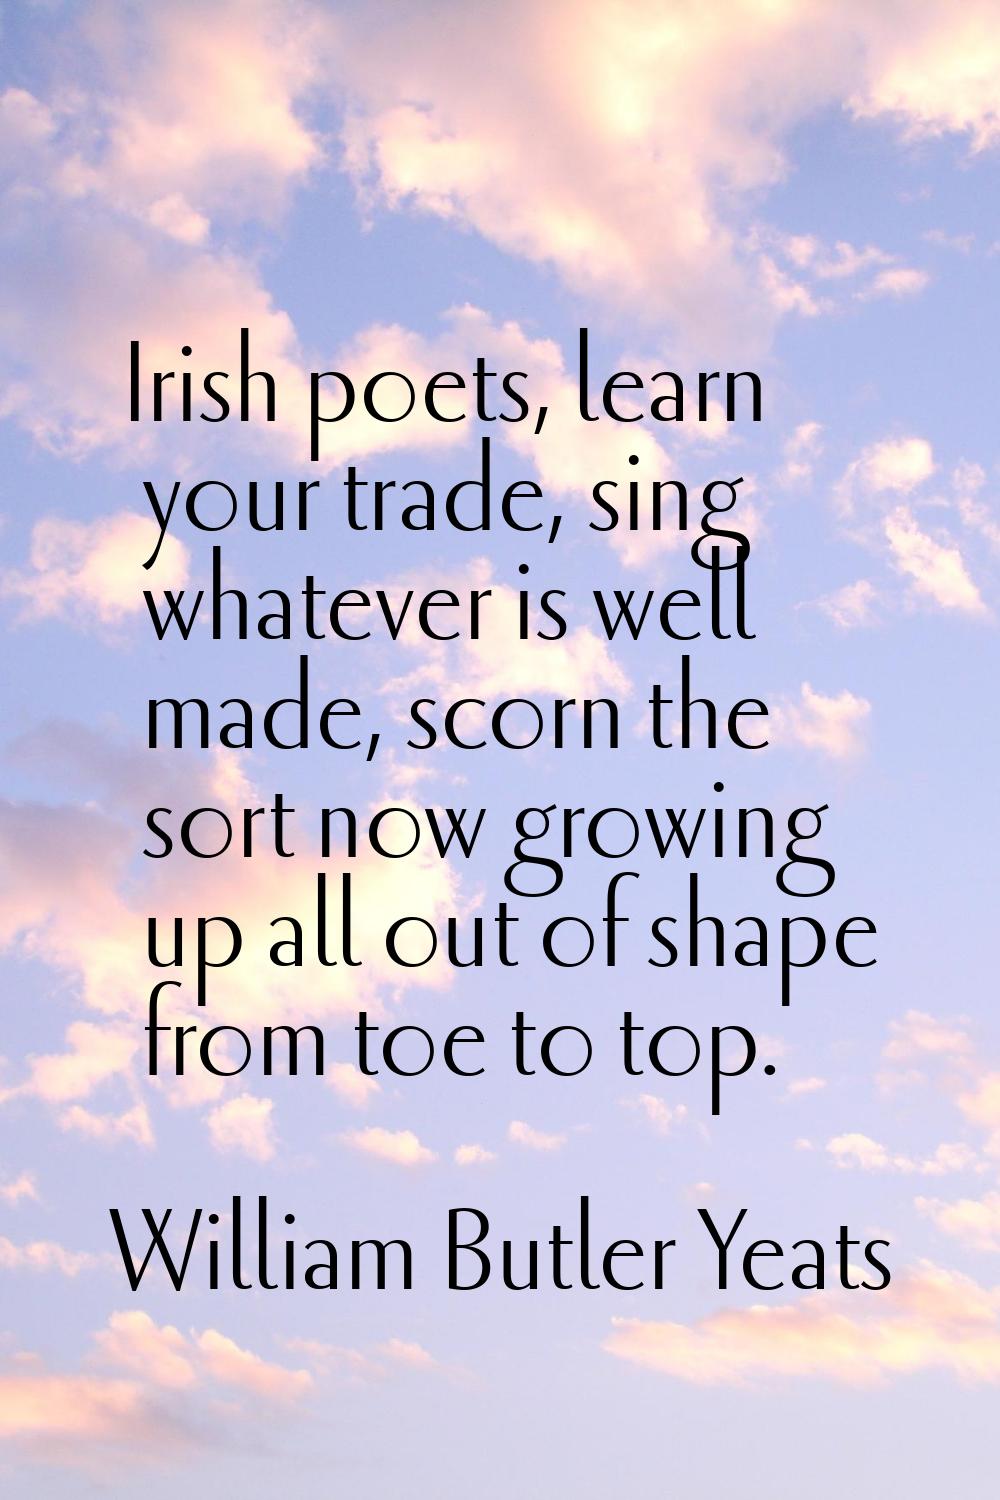 Irish poets, learn your trade, sing whatever is well made, scorn the sort now growing up all out of